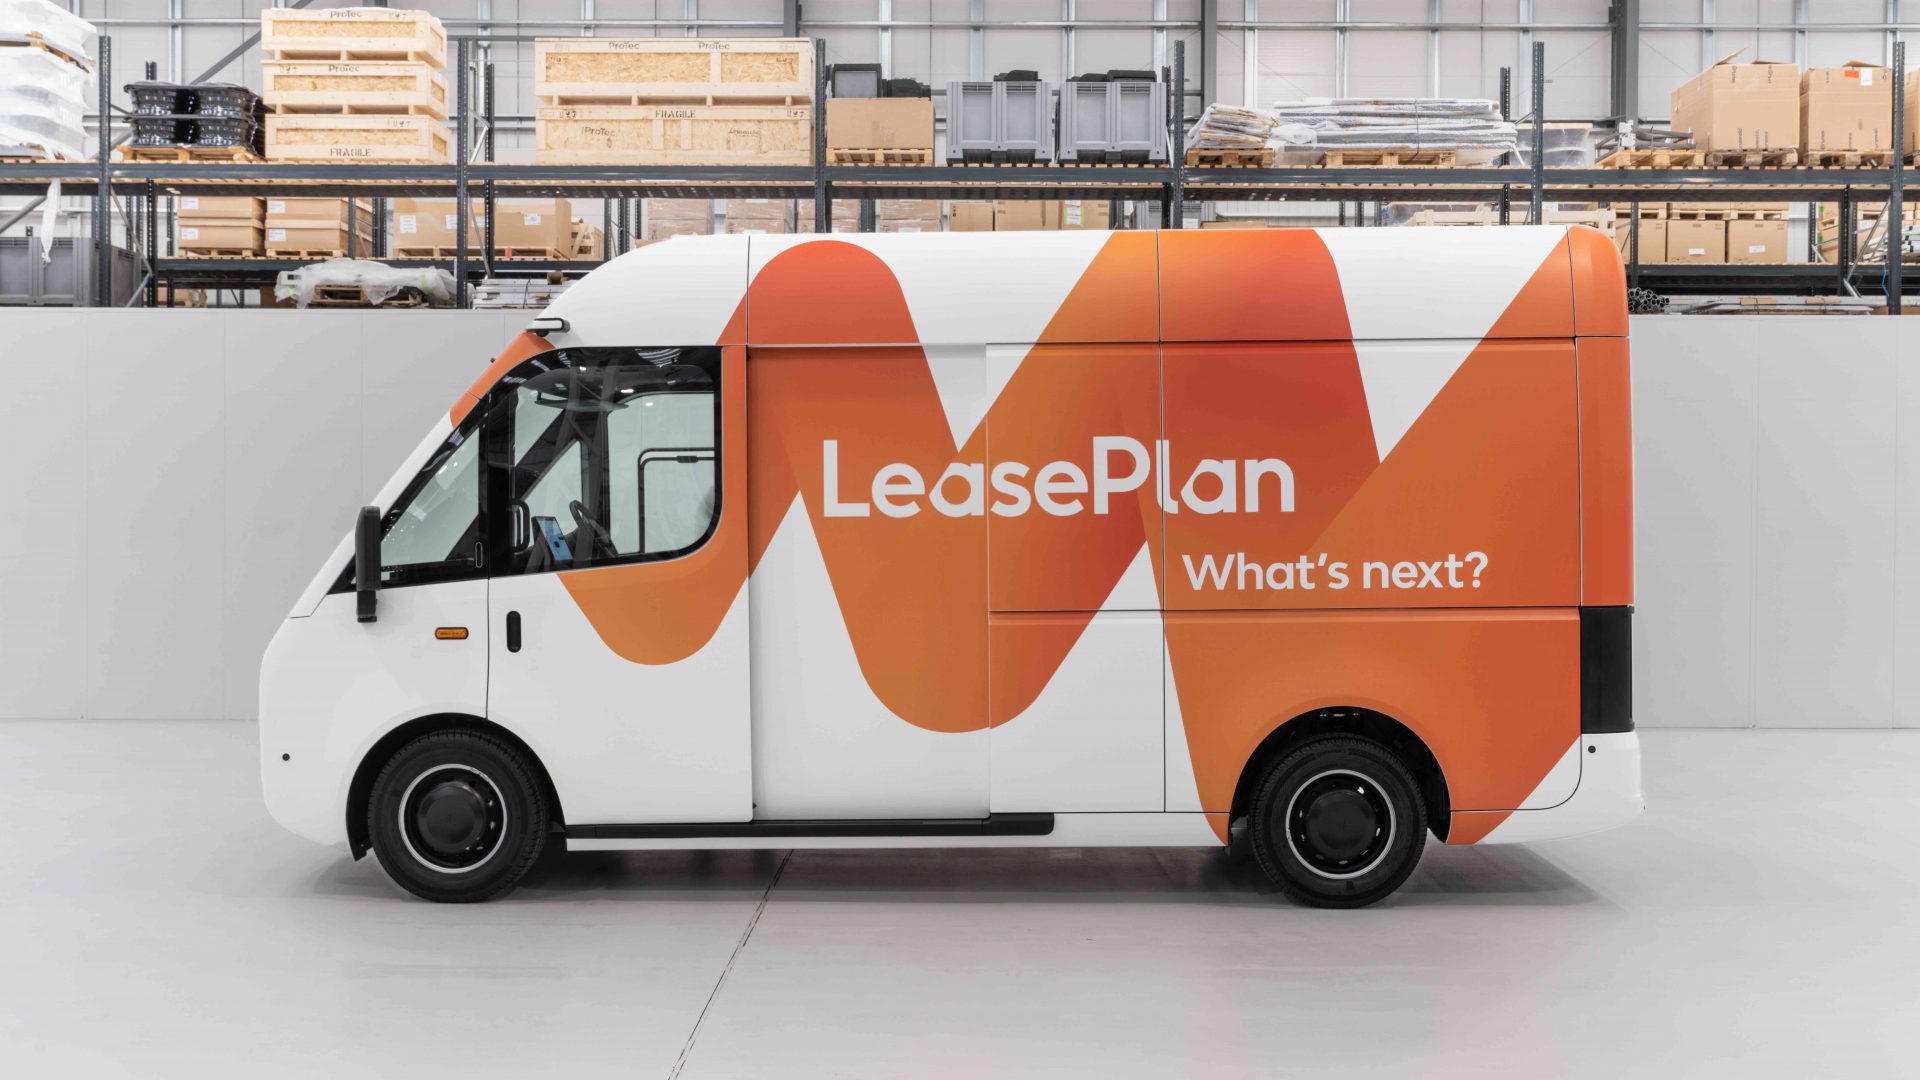 Arrival to partner with LeasePlan 3,000 electric vans headed to Europe